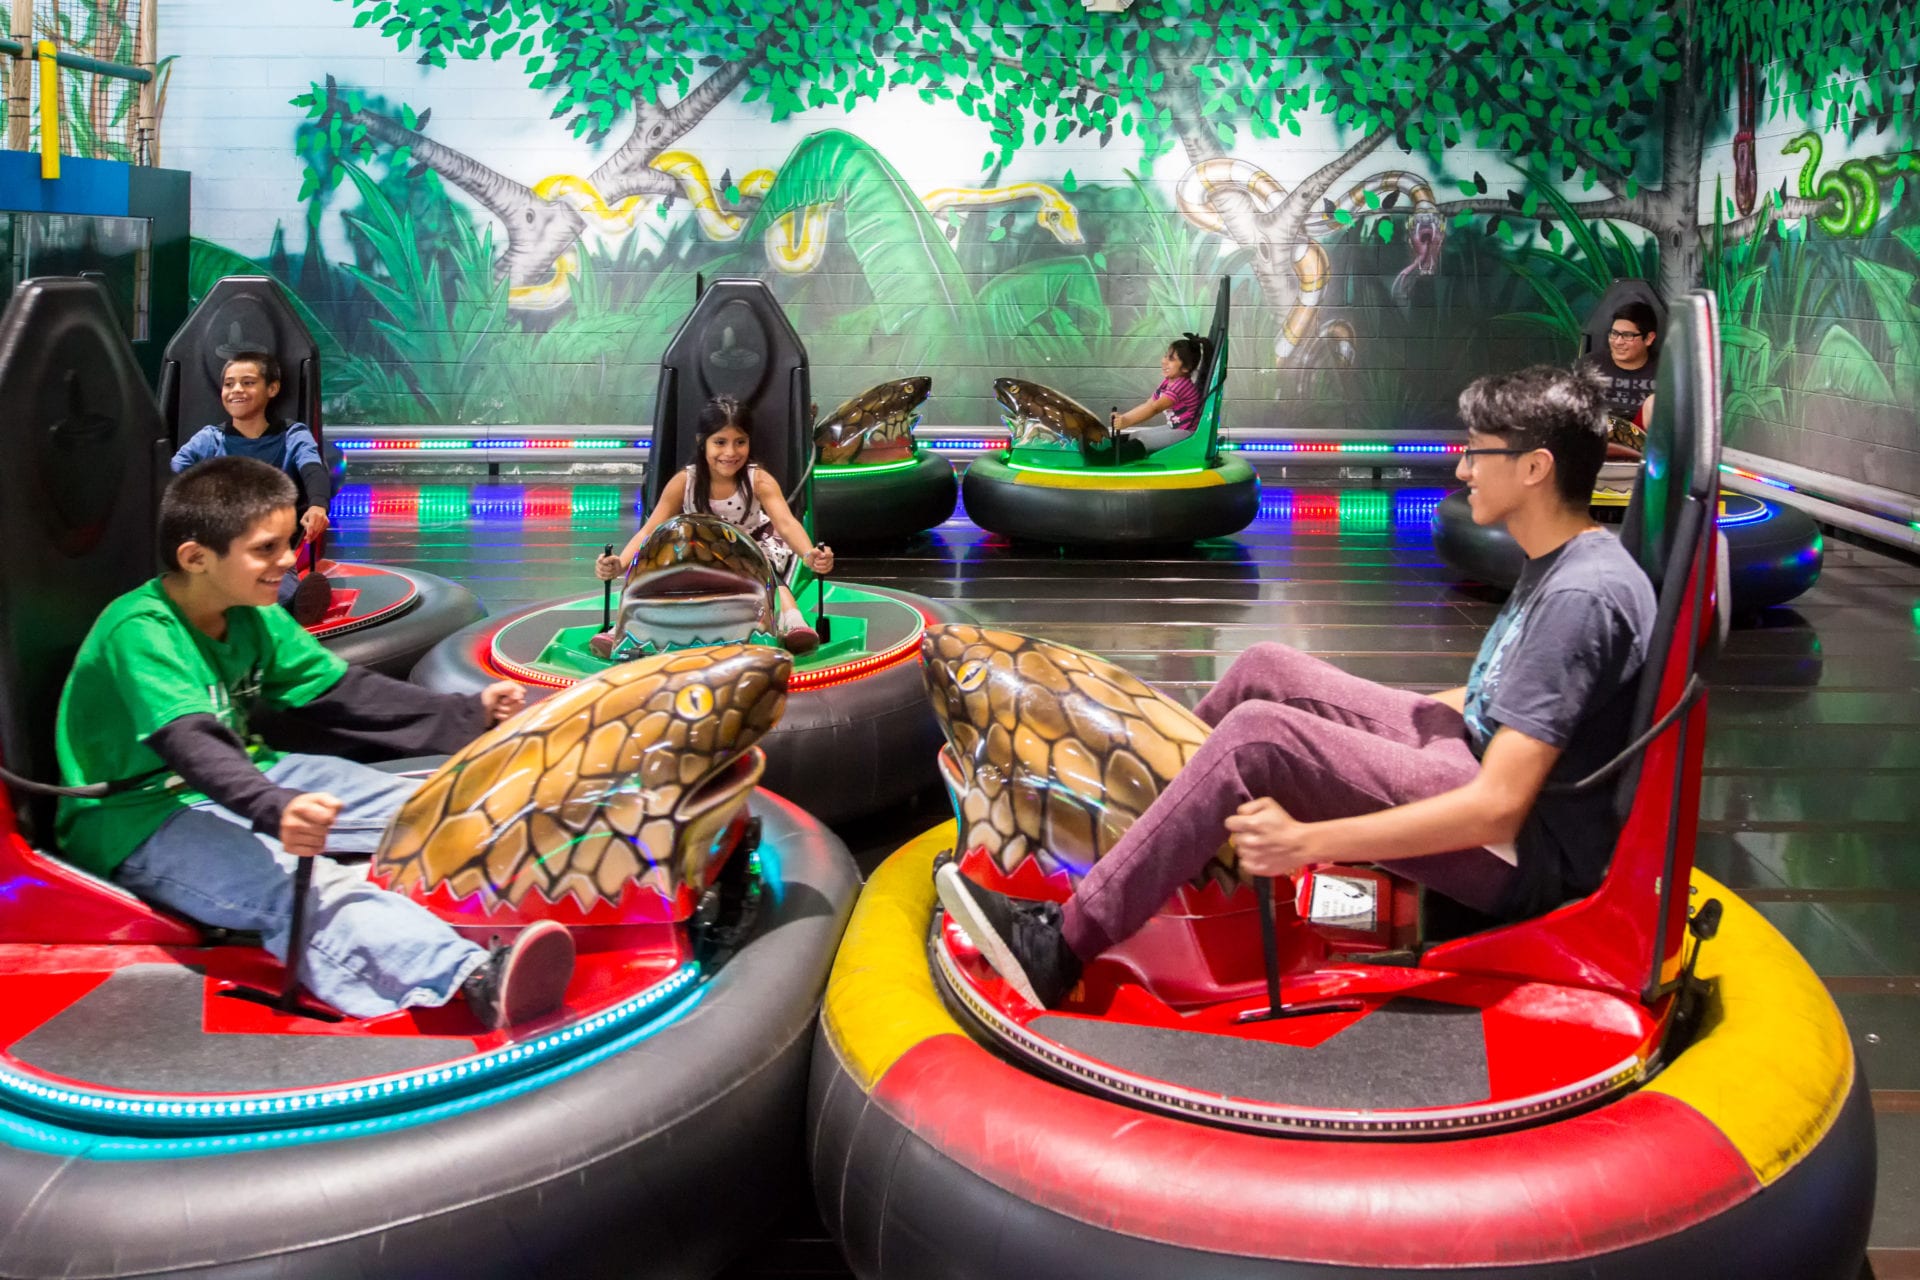 Kids playing in Bumper cars with each other